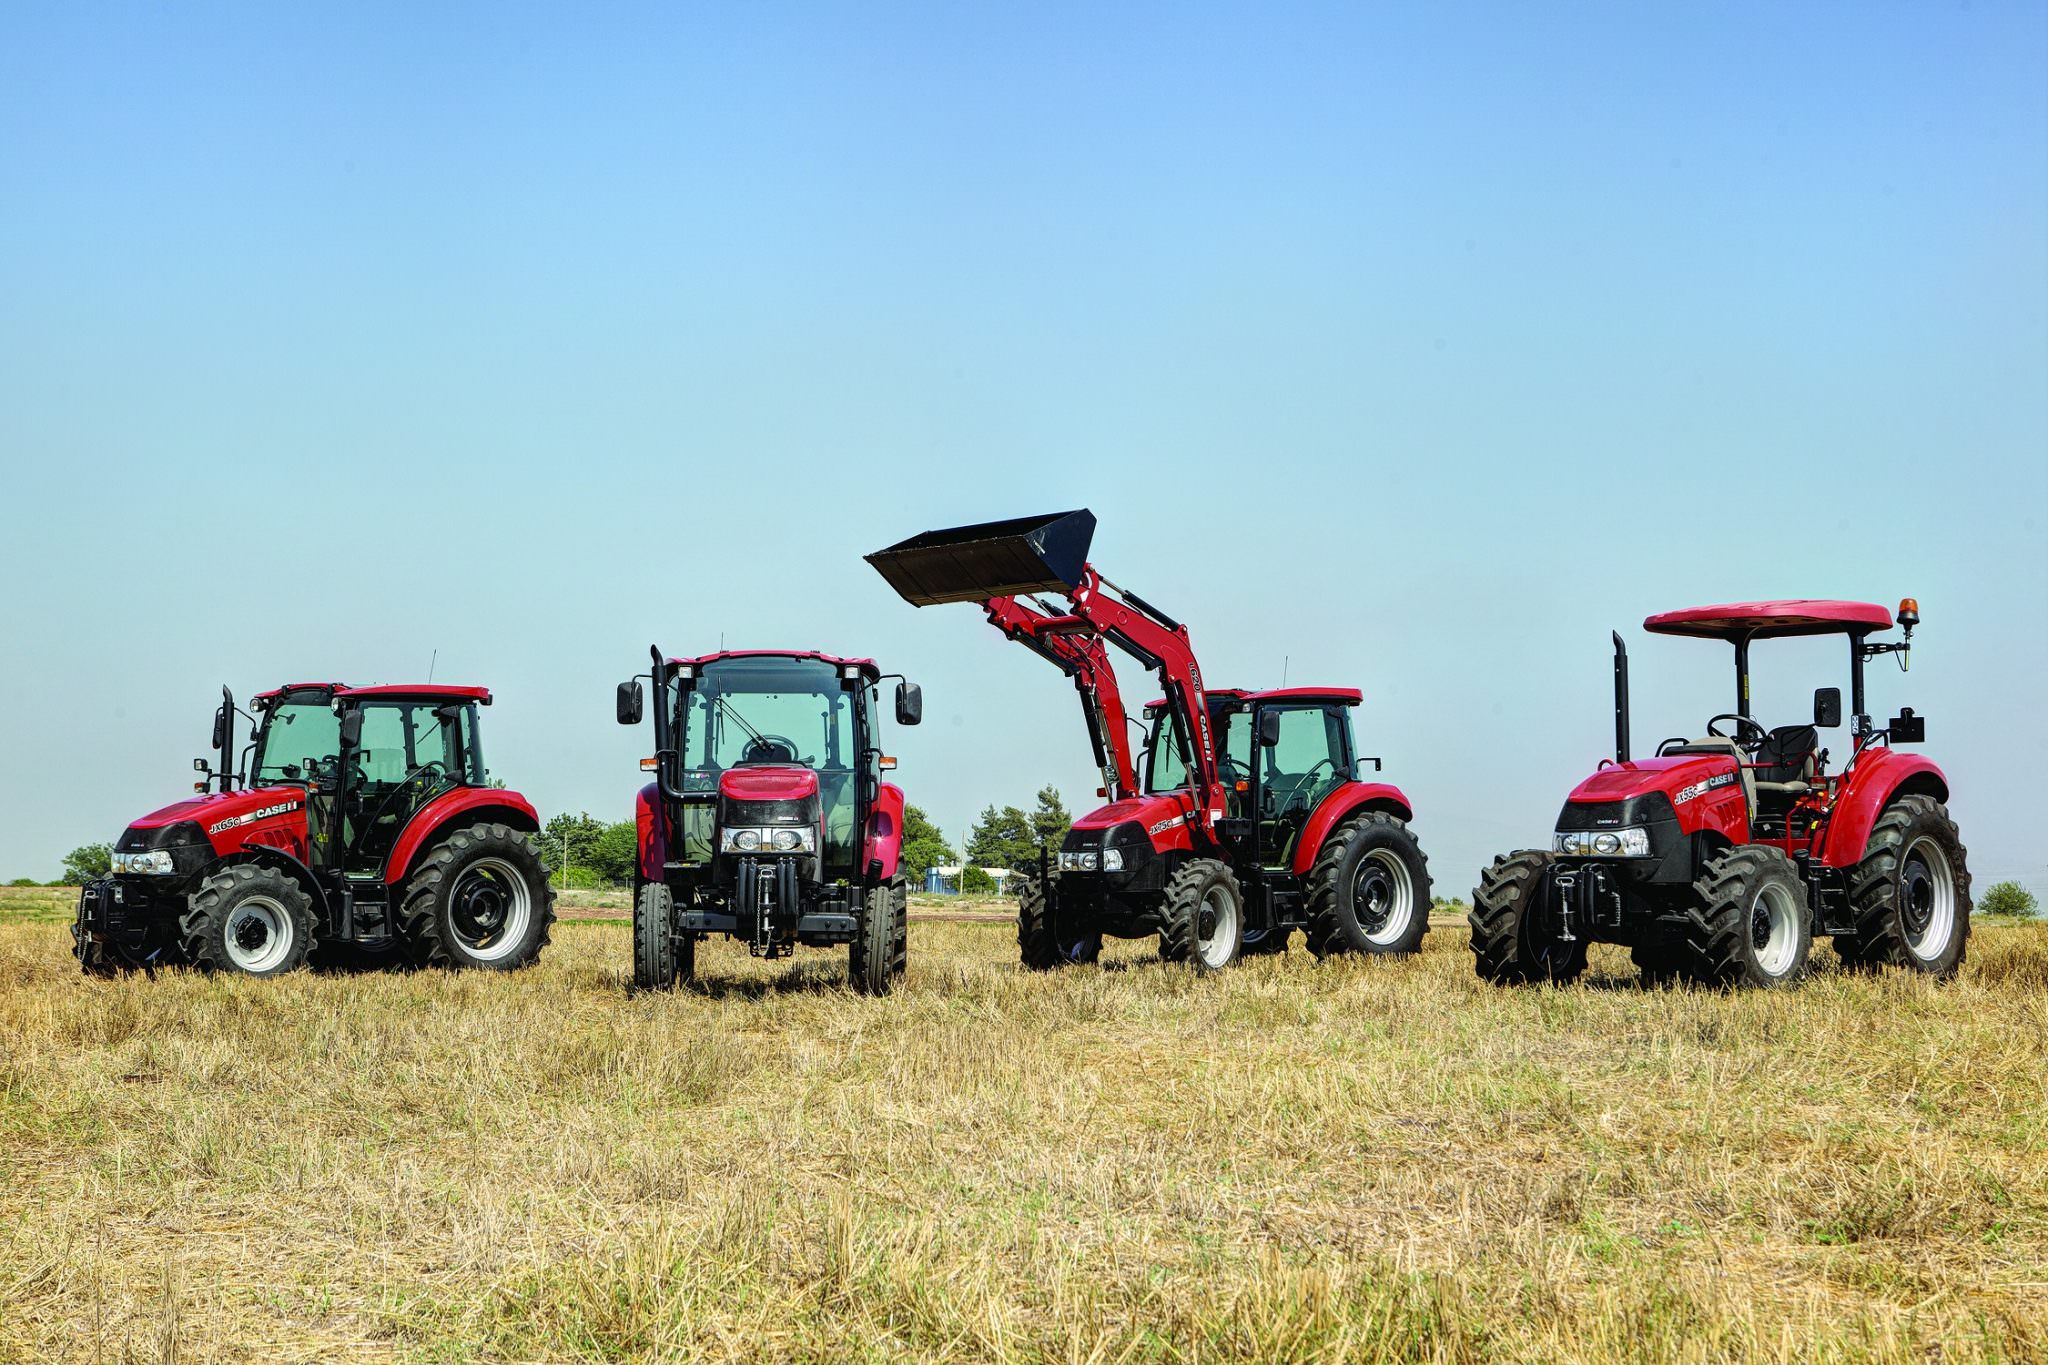 Case IH rolls out range of new products